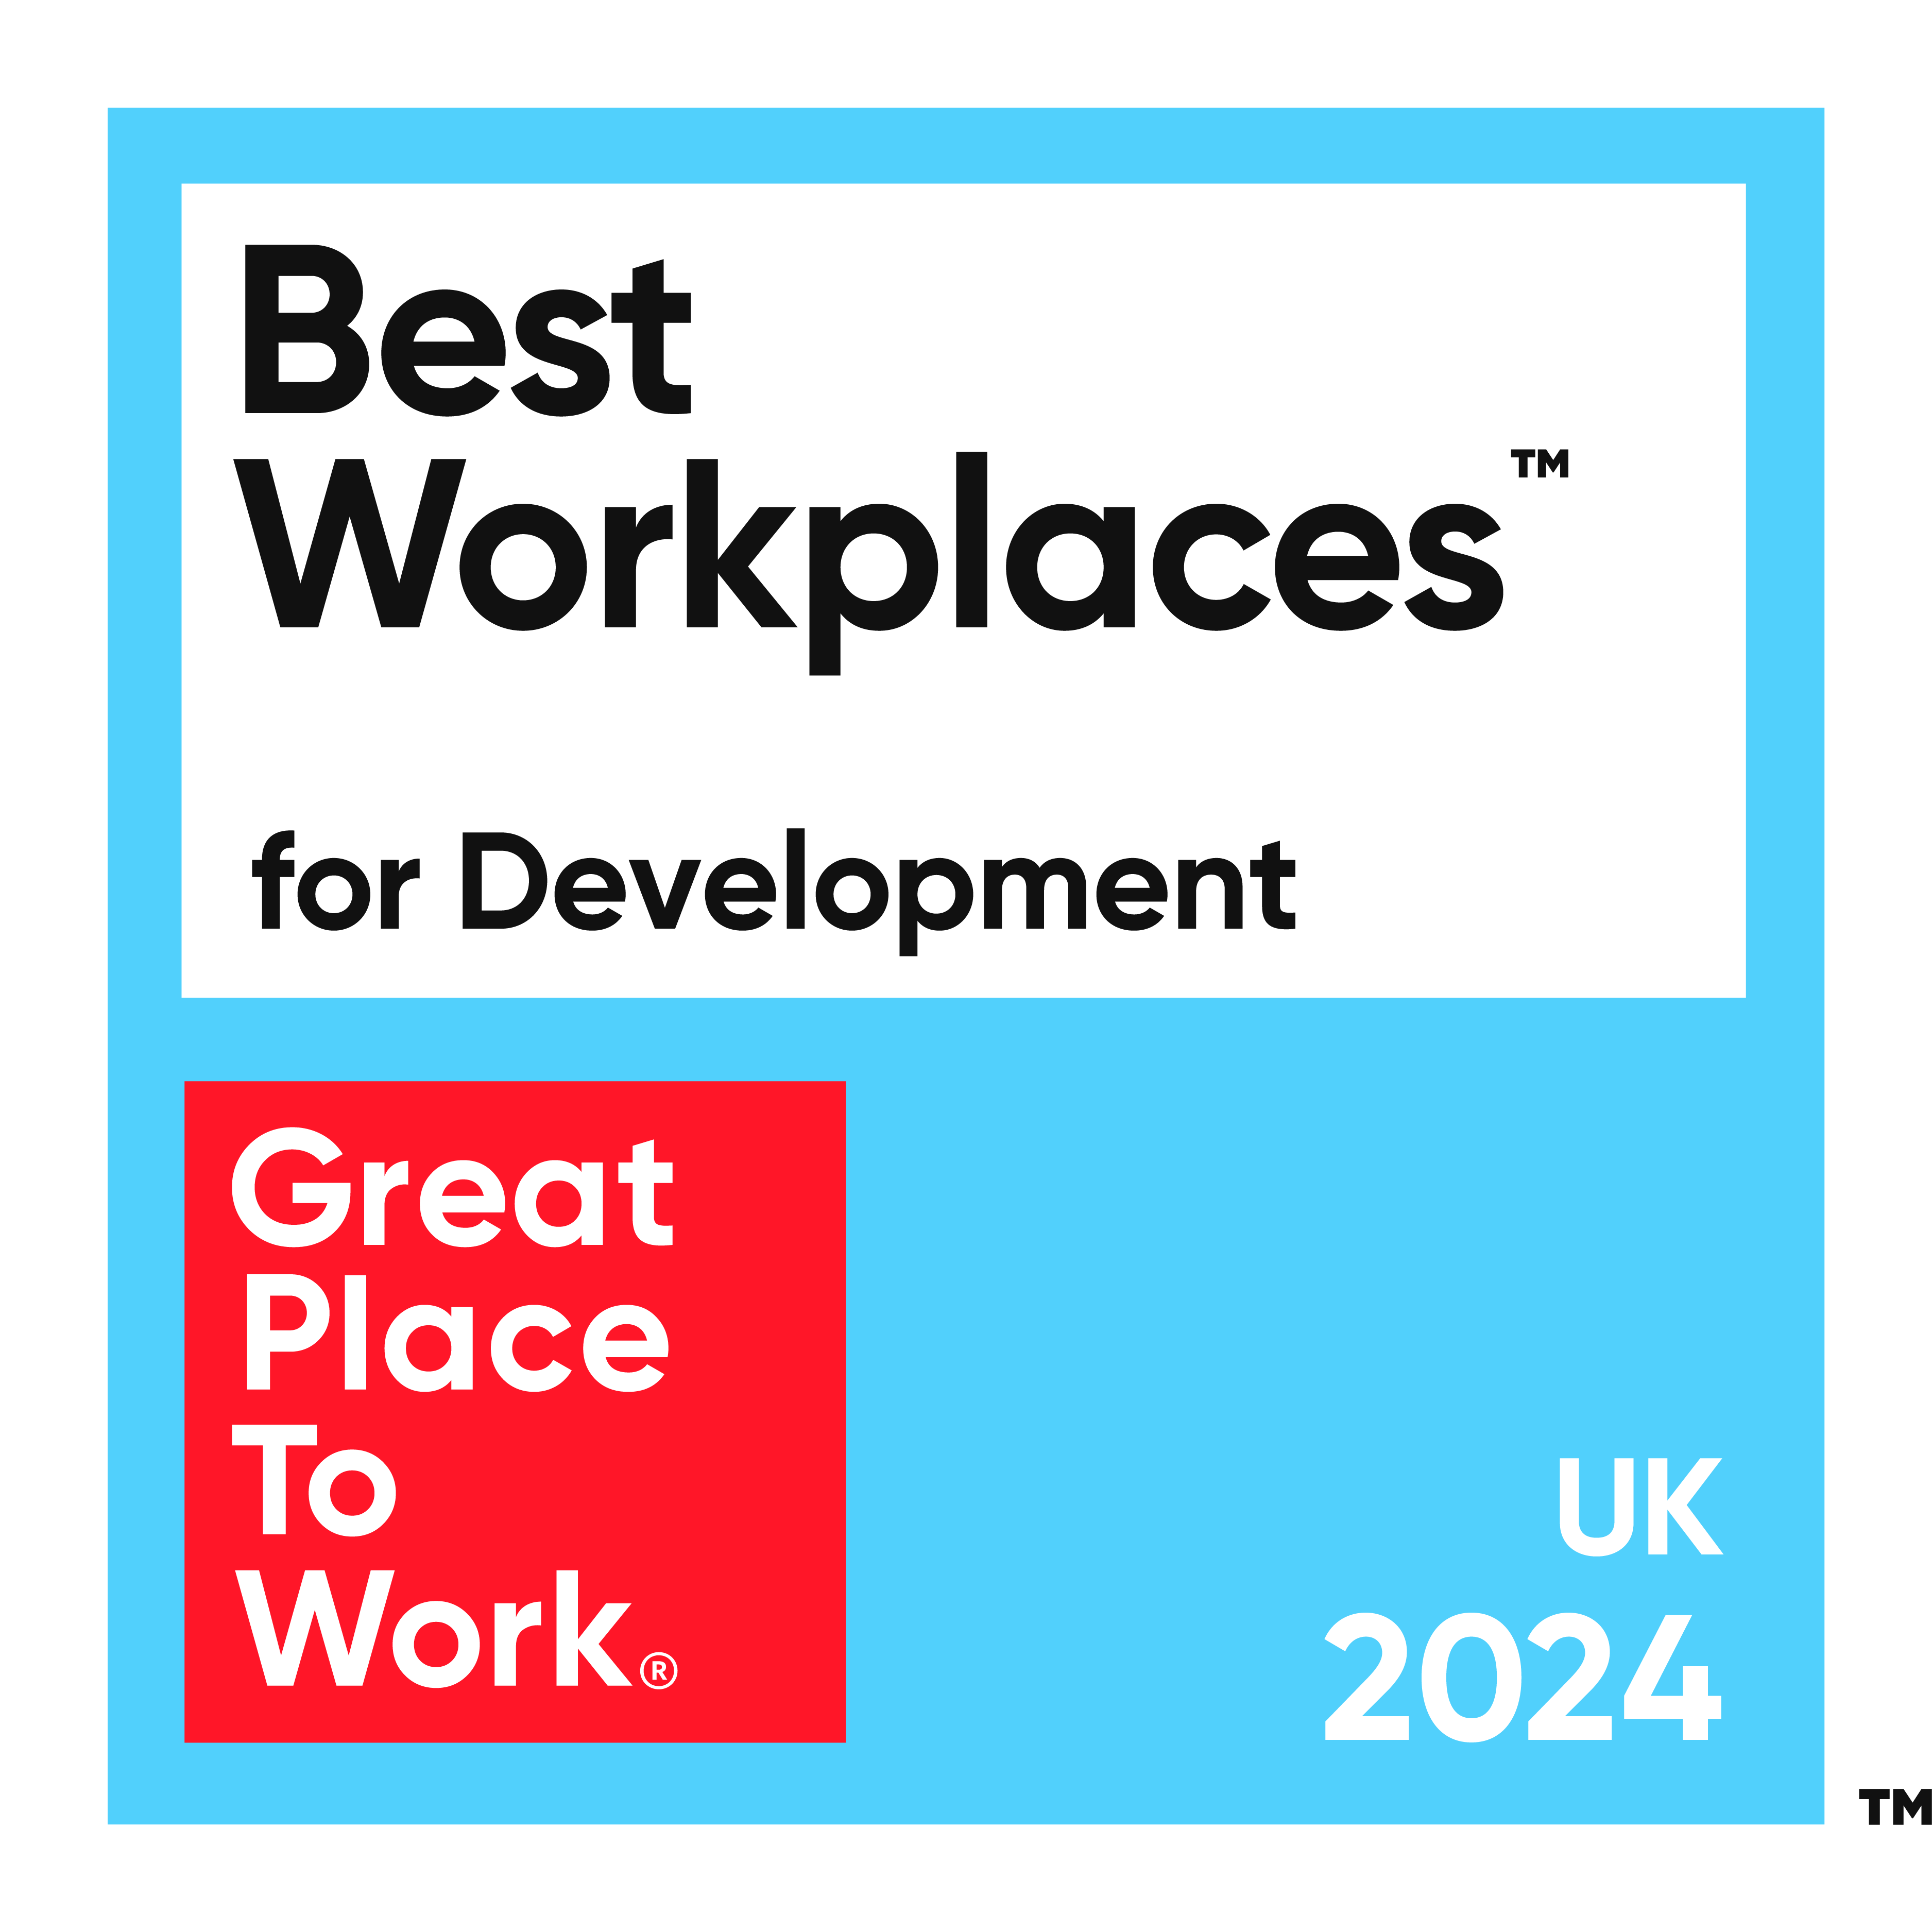 UK Best Workplaces for Development